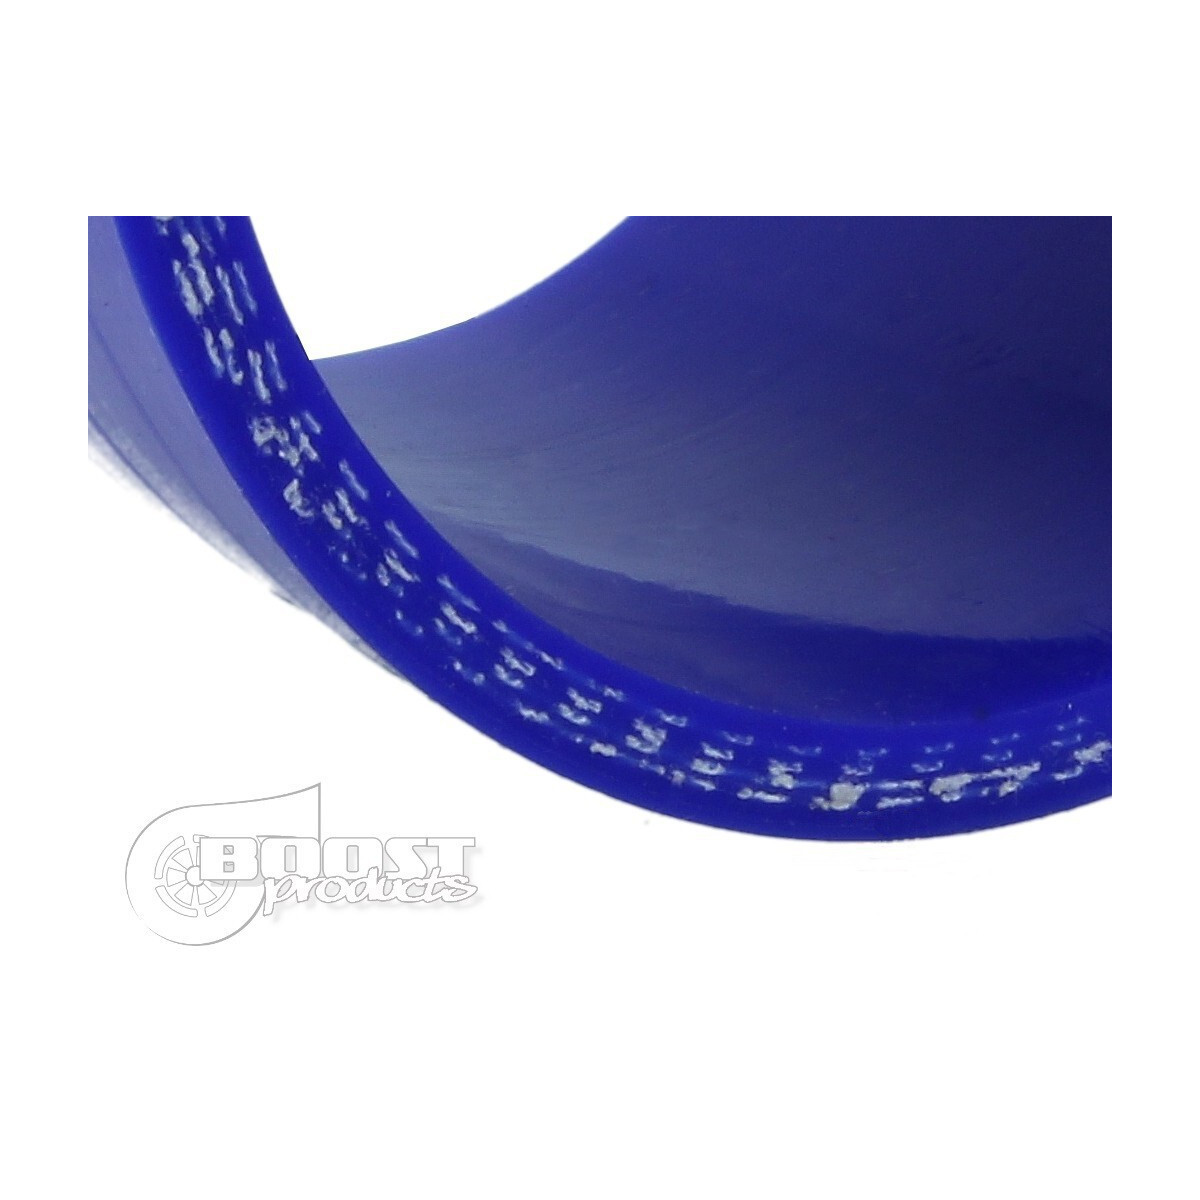 BOOST products Silicone Hose 89mm, 1m Length, blue